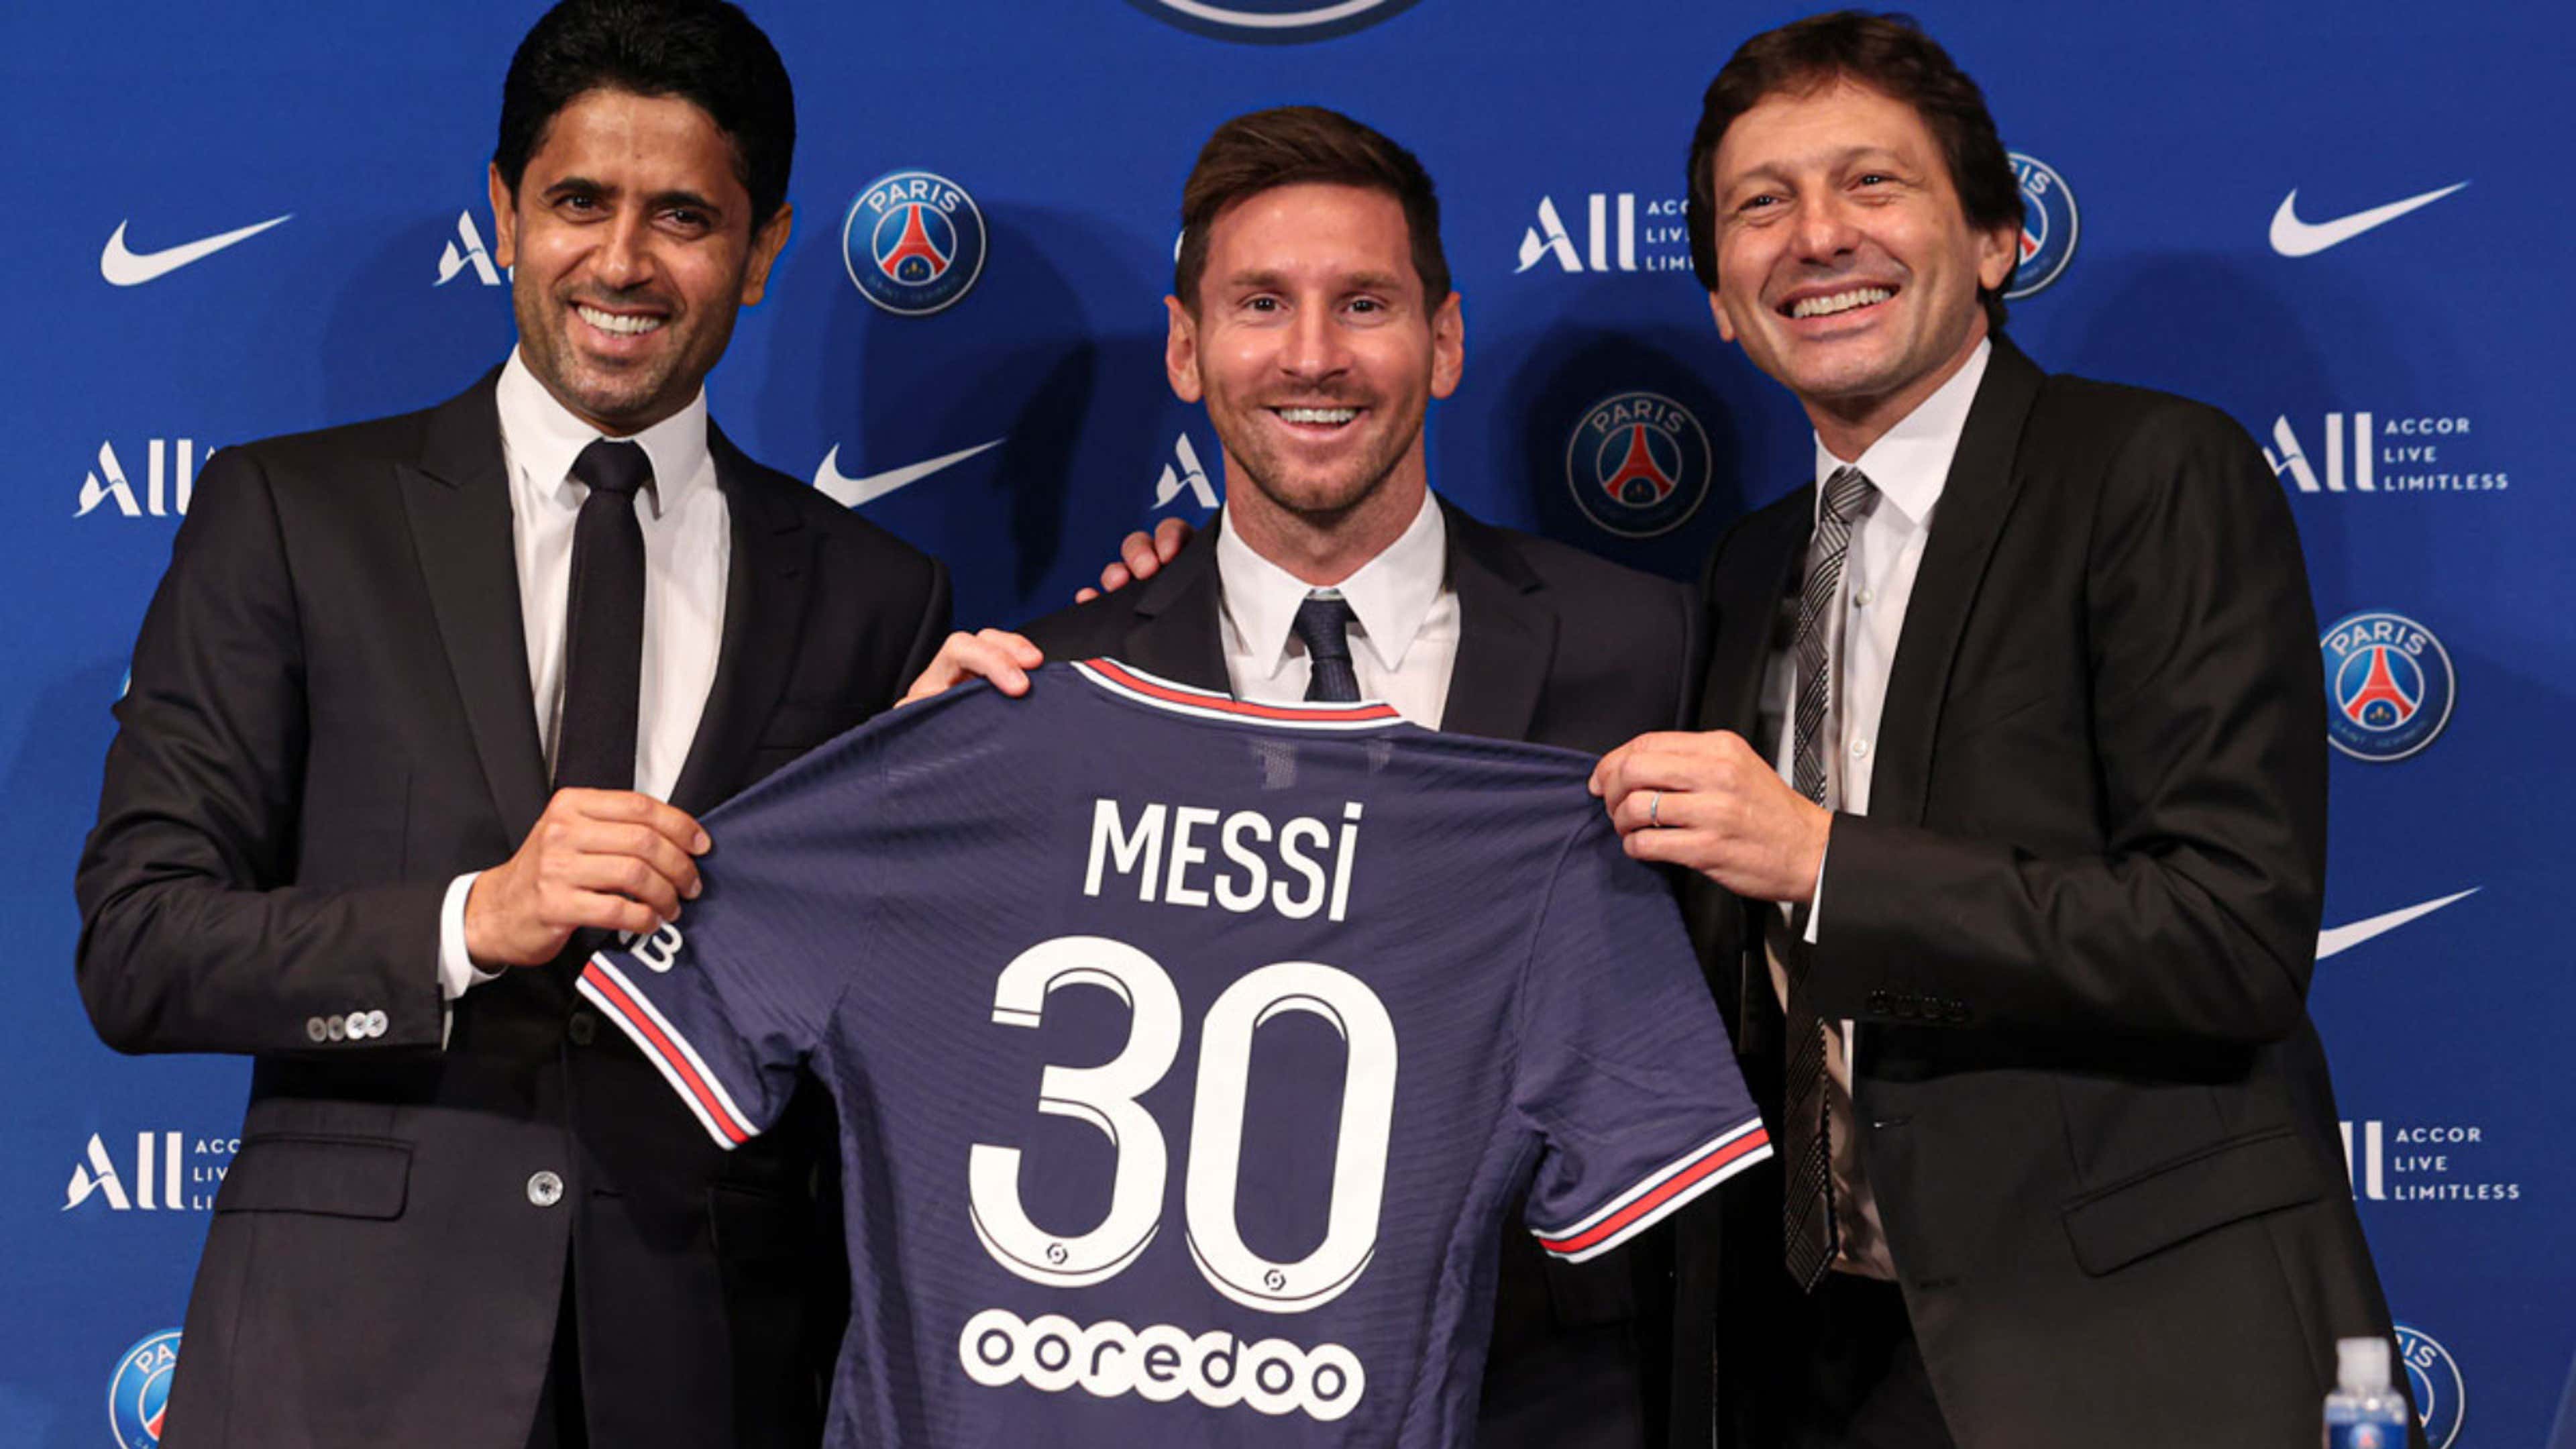 Lionel Messi's PSG Jersey Sold Out in 30 Minutes